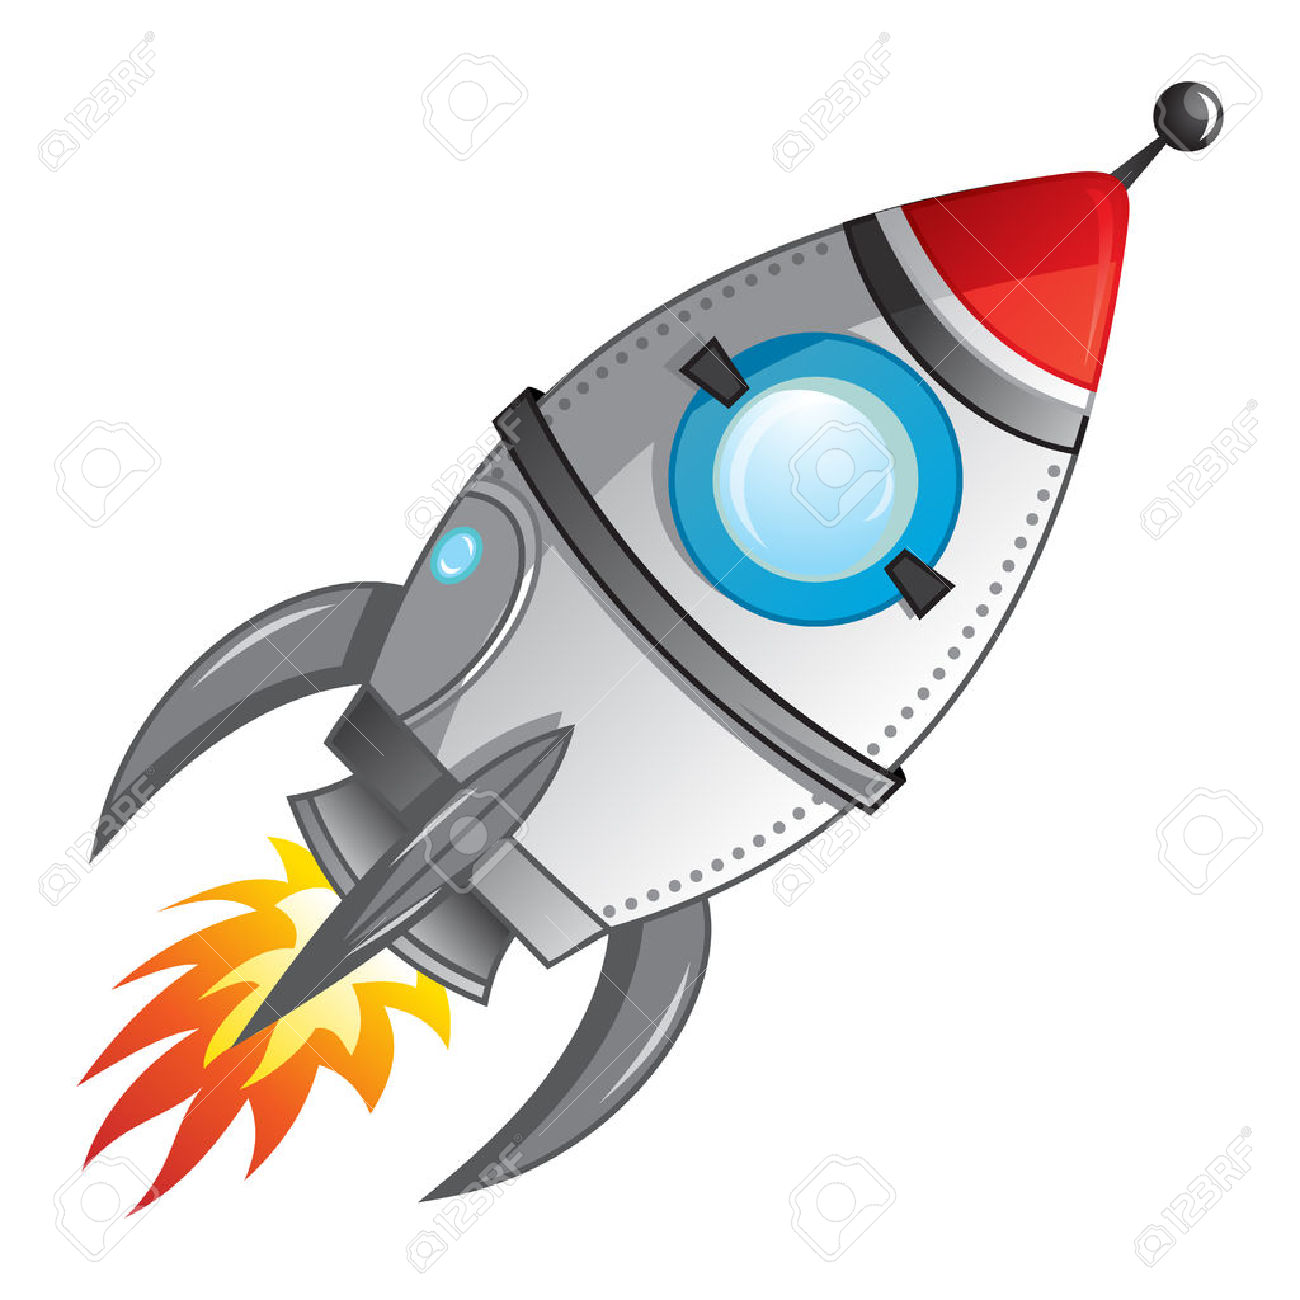 1,411 Missile Launch Stock Vector Illustration And Royalty Free.